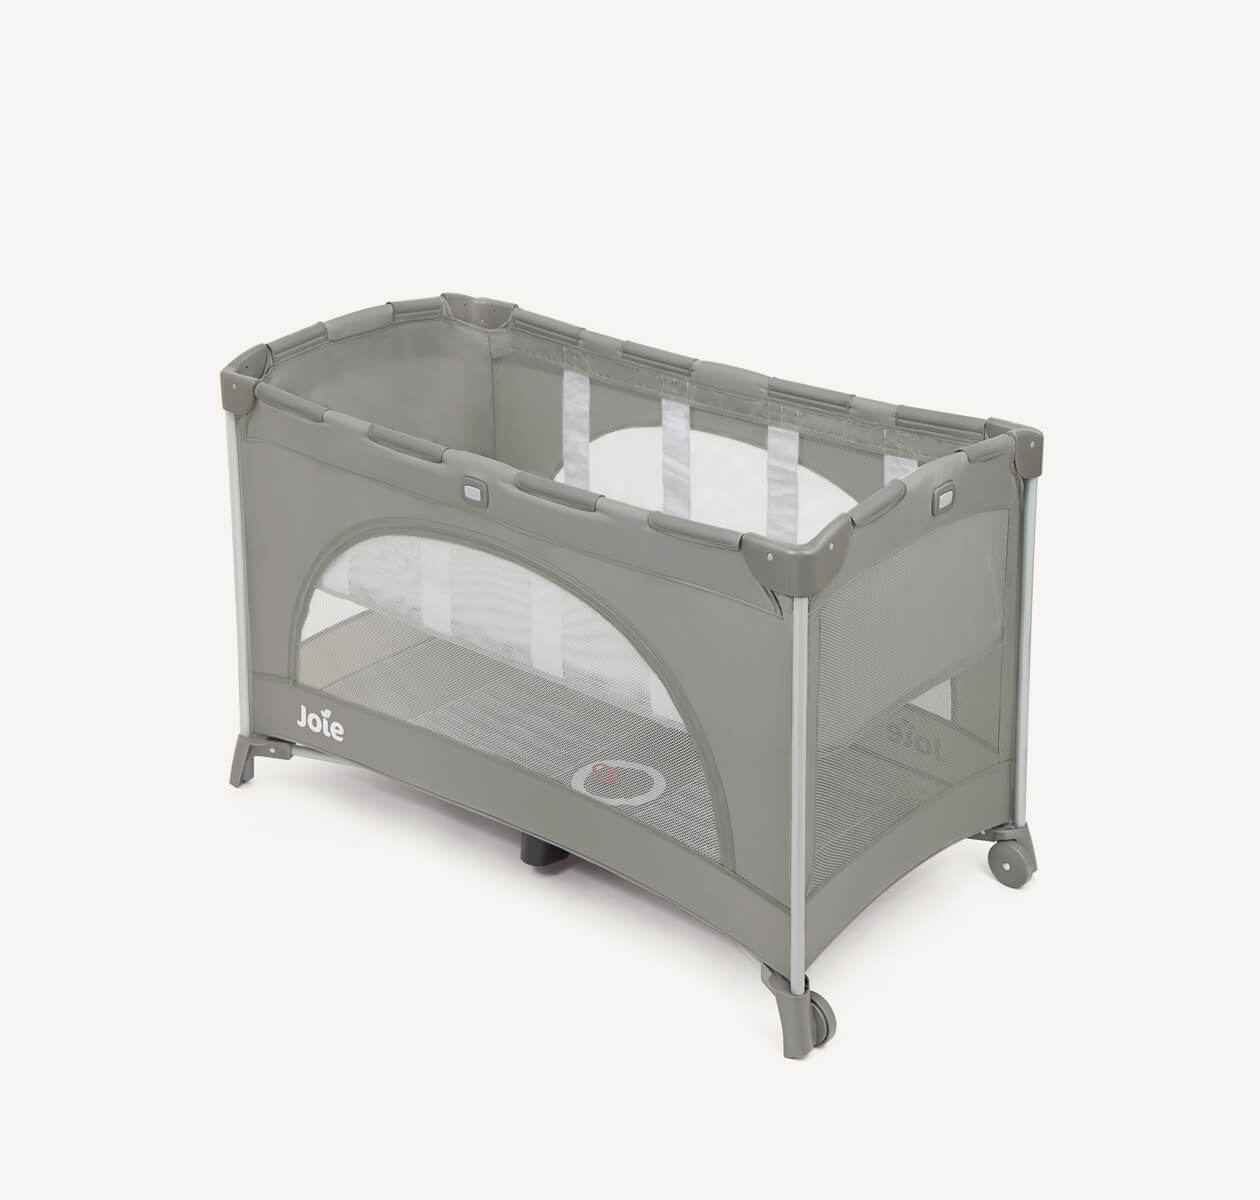 The Joie travel cot allura in grey with a bassinet at a left angle.